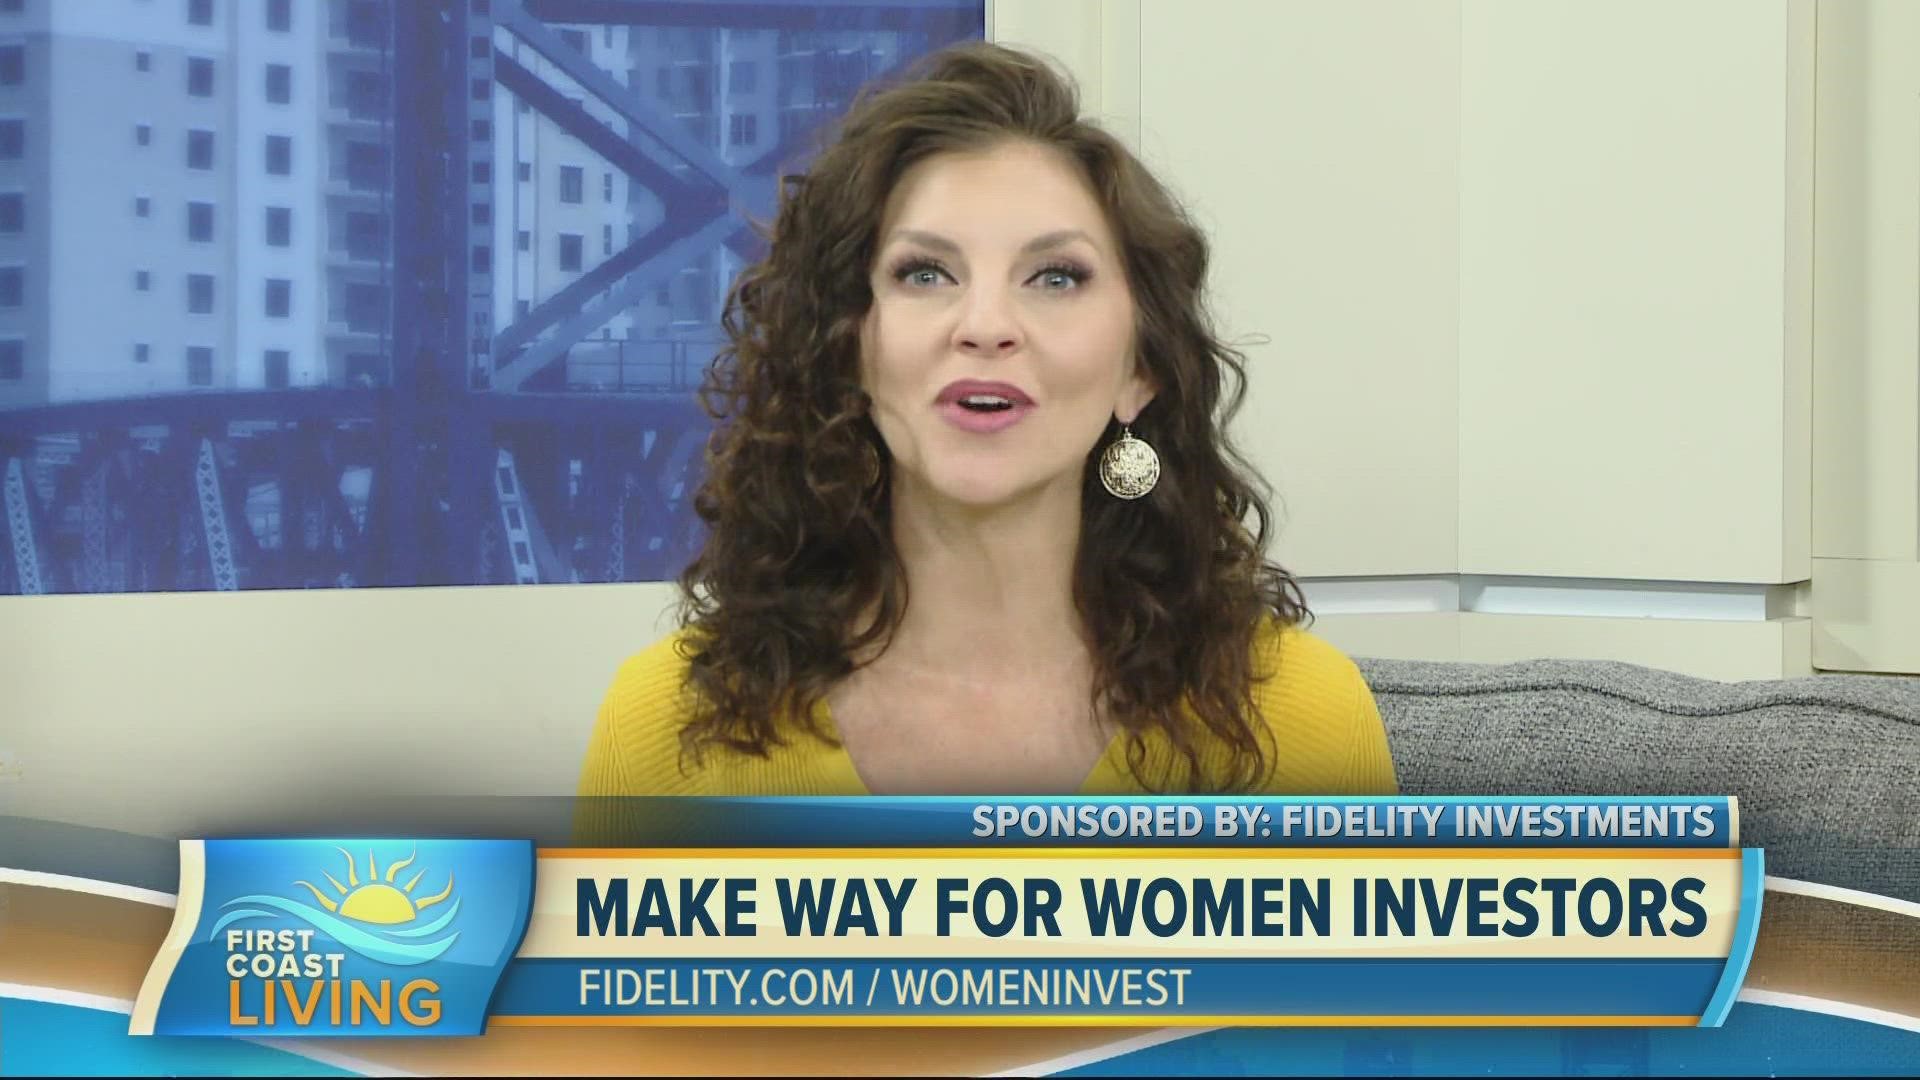 More women than ever are investing extra savings. Lorna Kapusta, Head of Women Investors Fidelity explains how events of the past year have been a powerful catalyst.